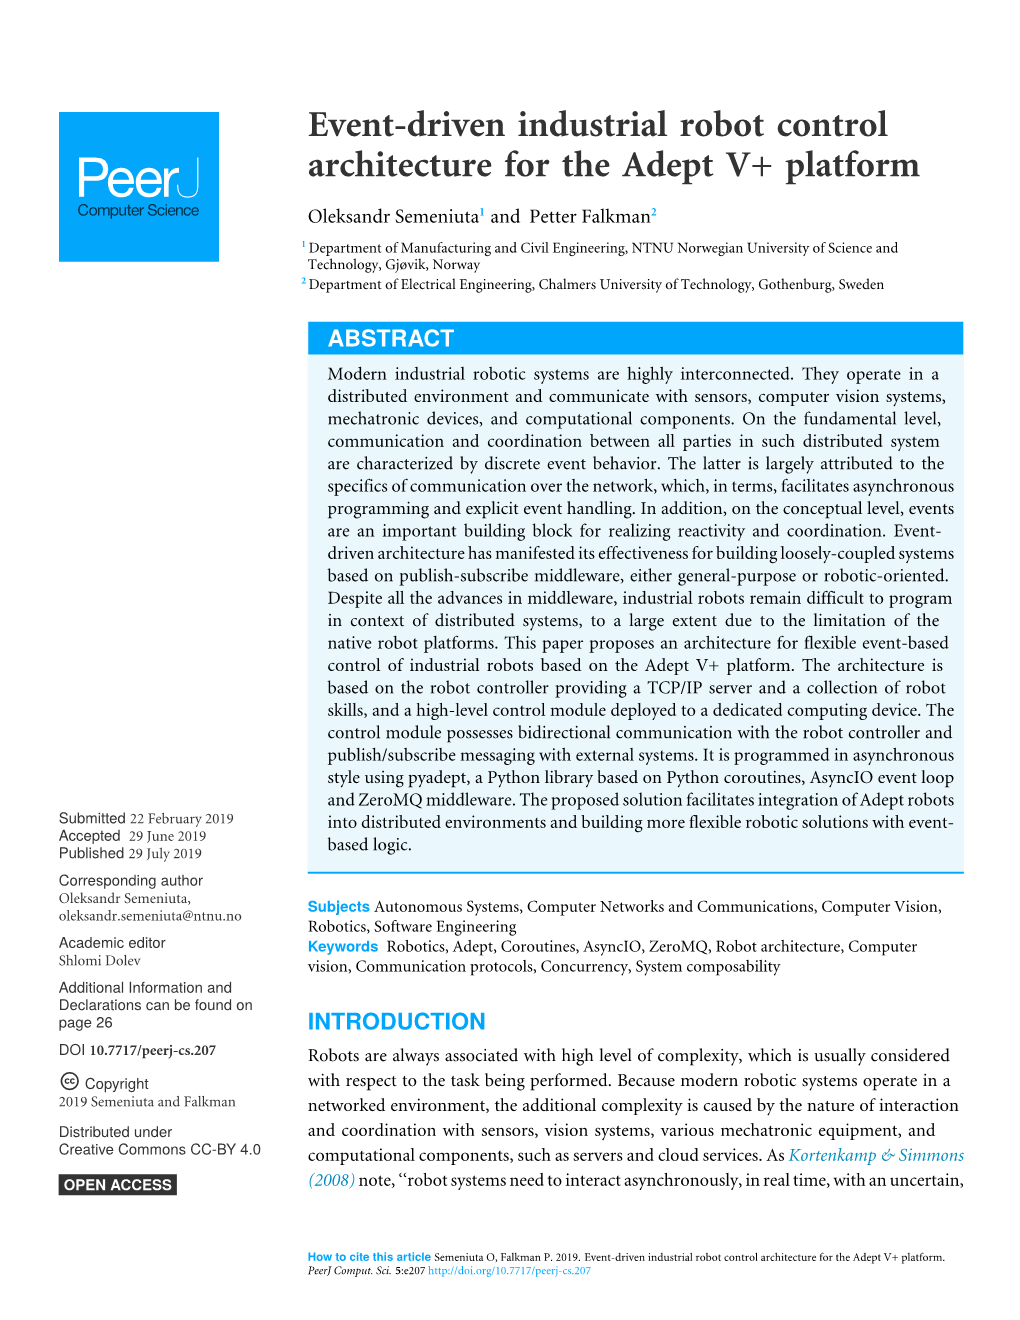 Event-Driven Industrial Robot Control Architecture for the Adept V+ Platform